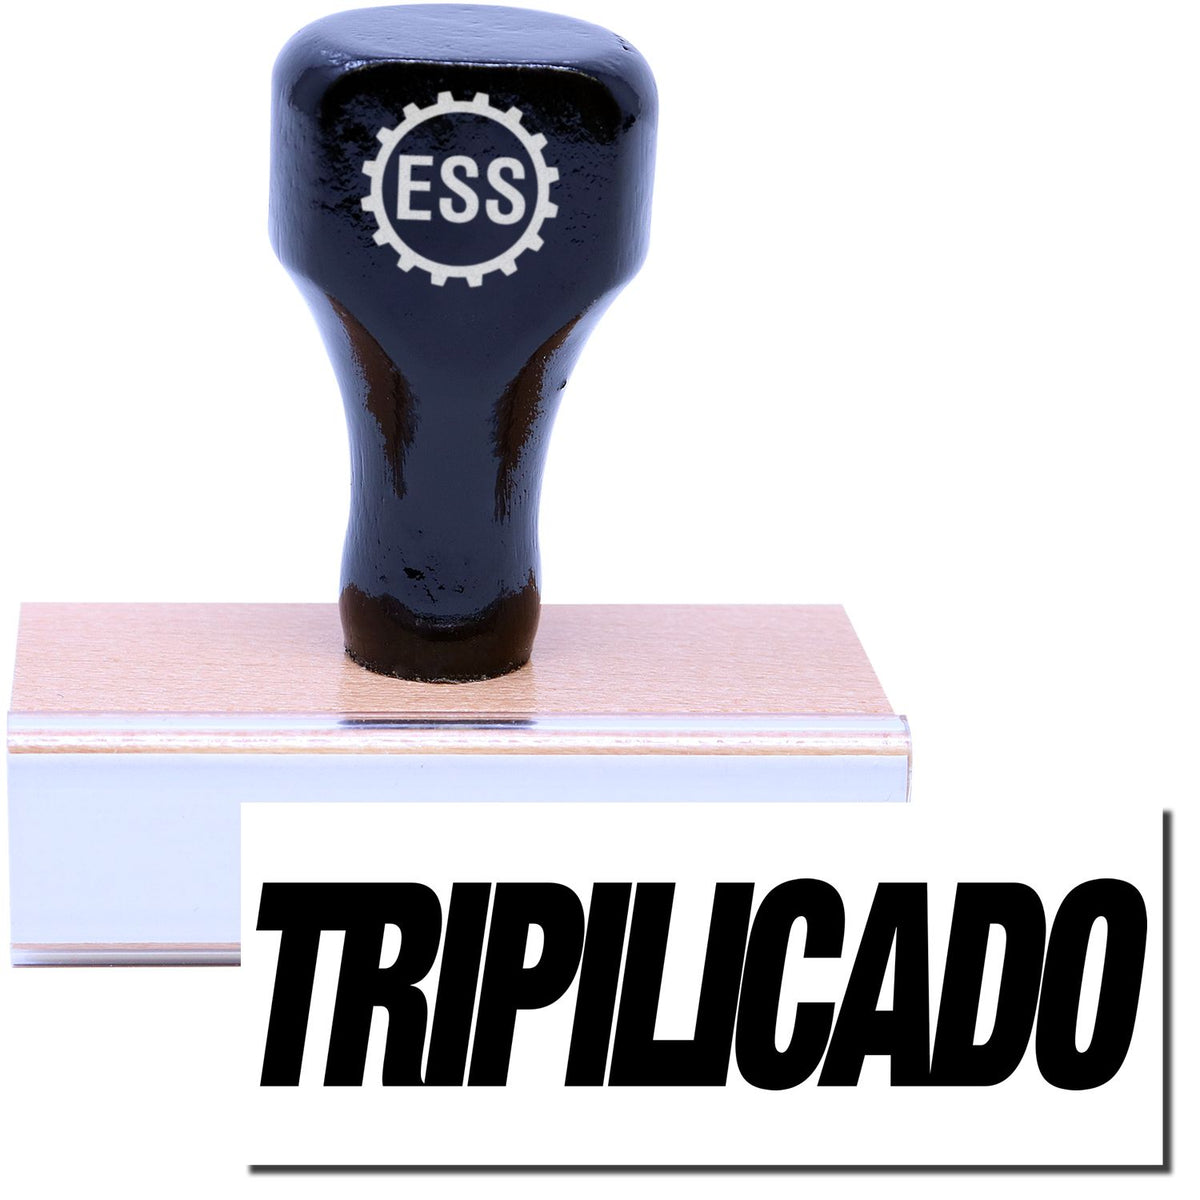 A stock office rubber stamp with a stamped image showing how the text &quot;TRIPILICADO&quot; in a large font is displayed after stamping.